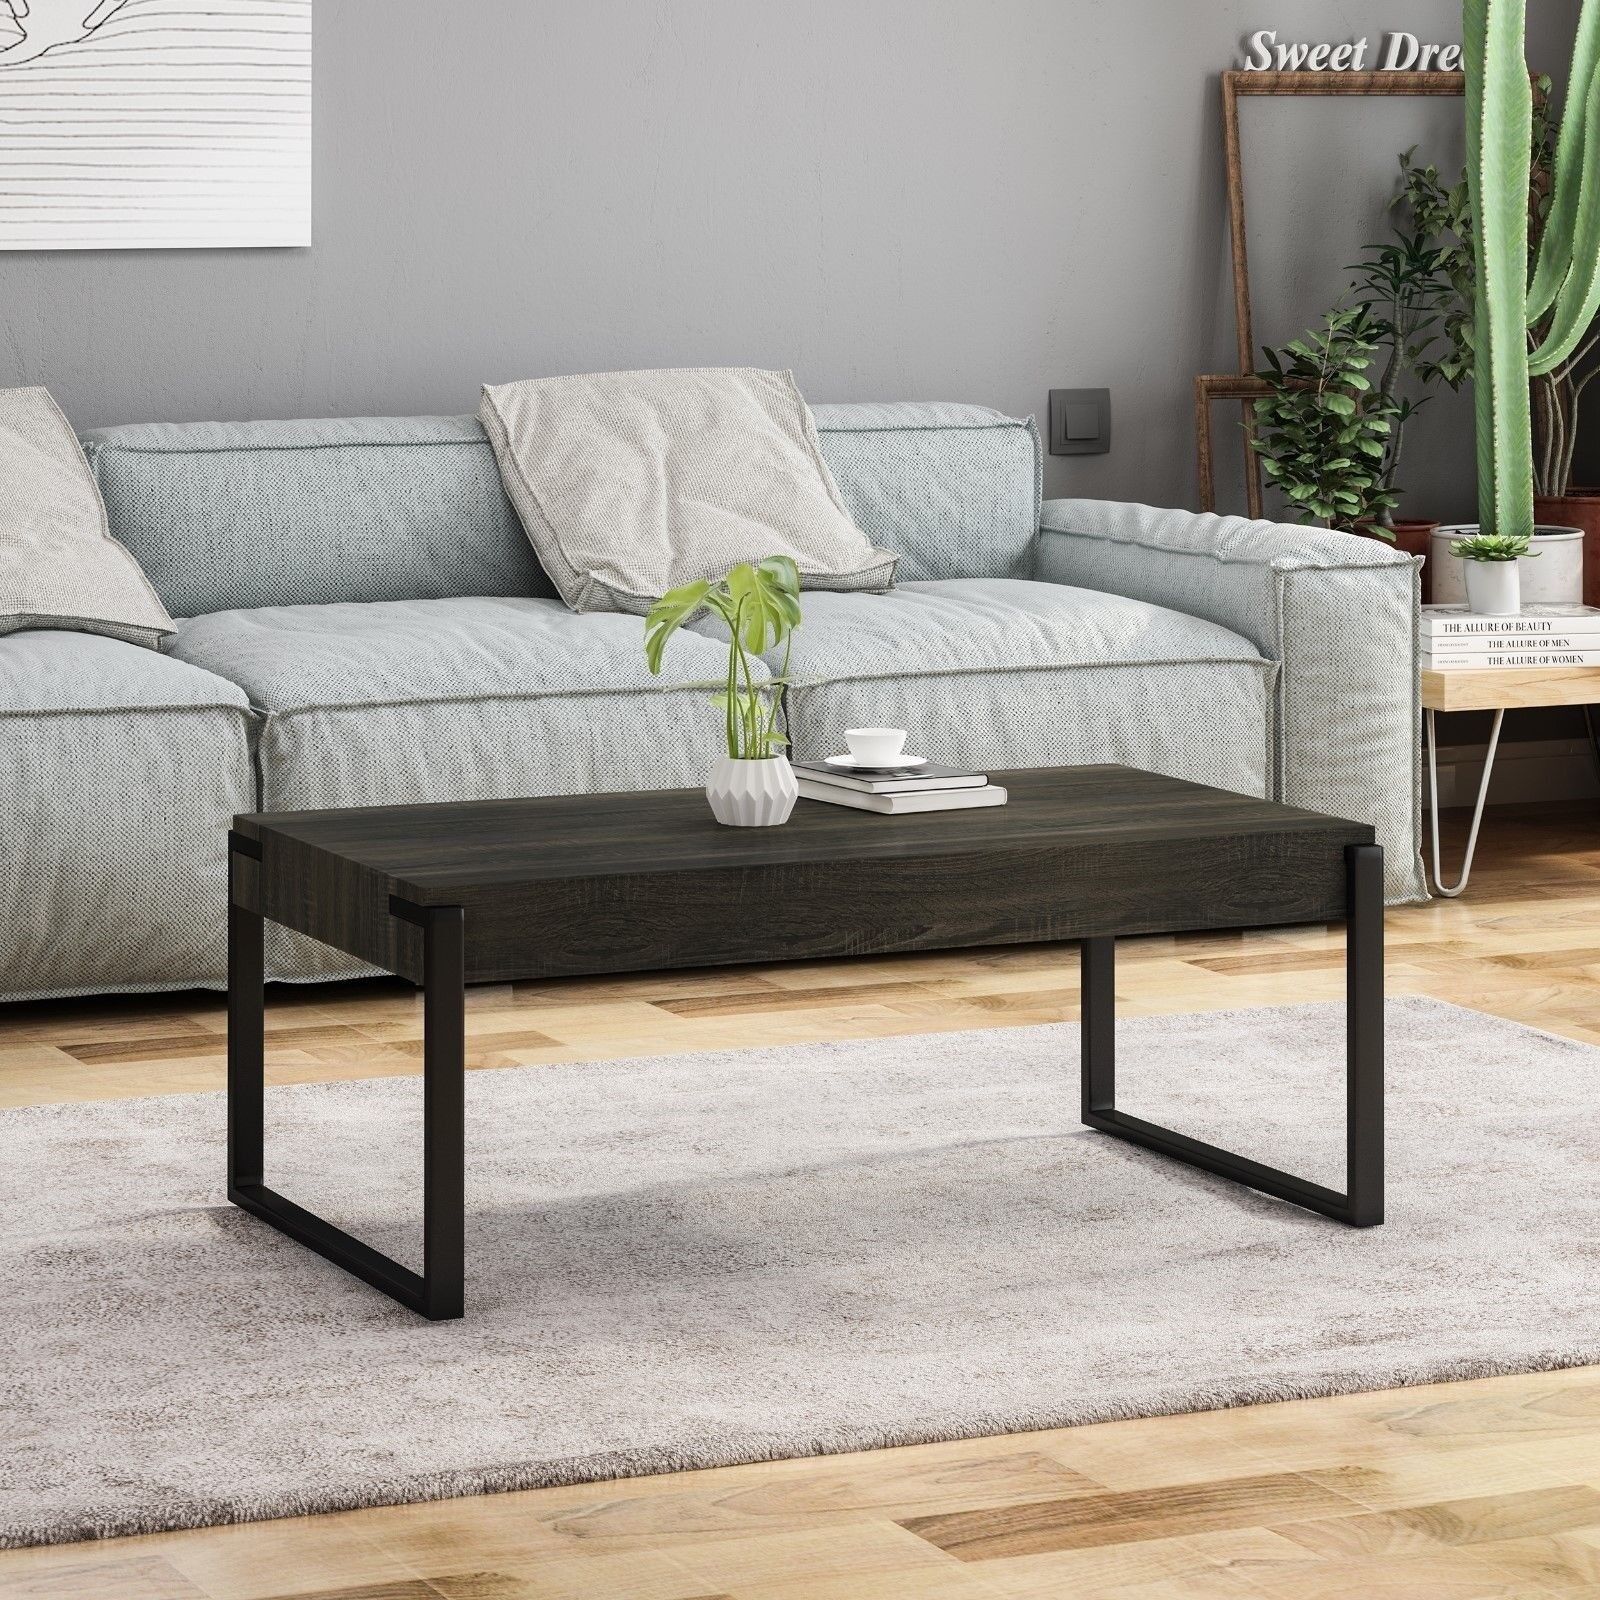 Shaw Modern Contemporary Industrial Faux Wood Coffee Table With Iron Legs |  Ebay Pertaining To Industrial Faux Wood Coffee Tables (View 2 of 15)